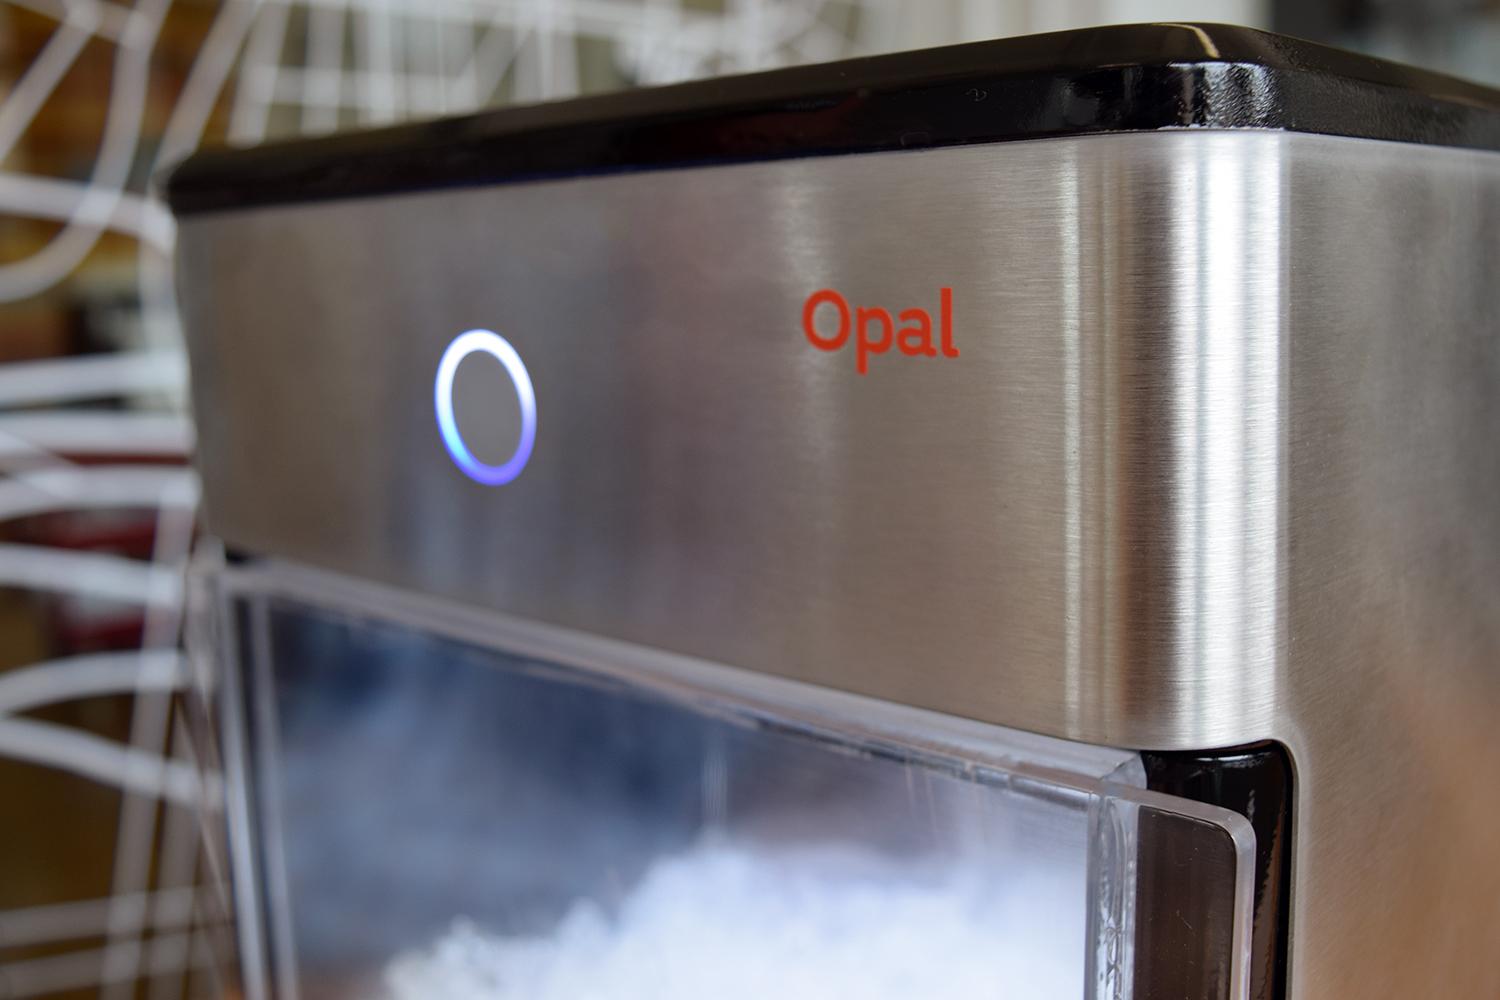 FirstBuild Opal Nugget Ice Maker Review: Awesome But Expensive